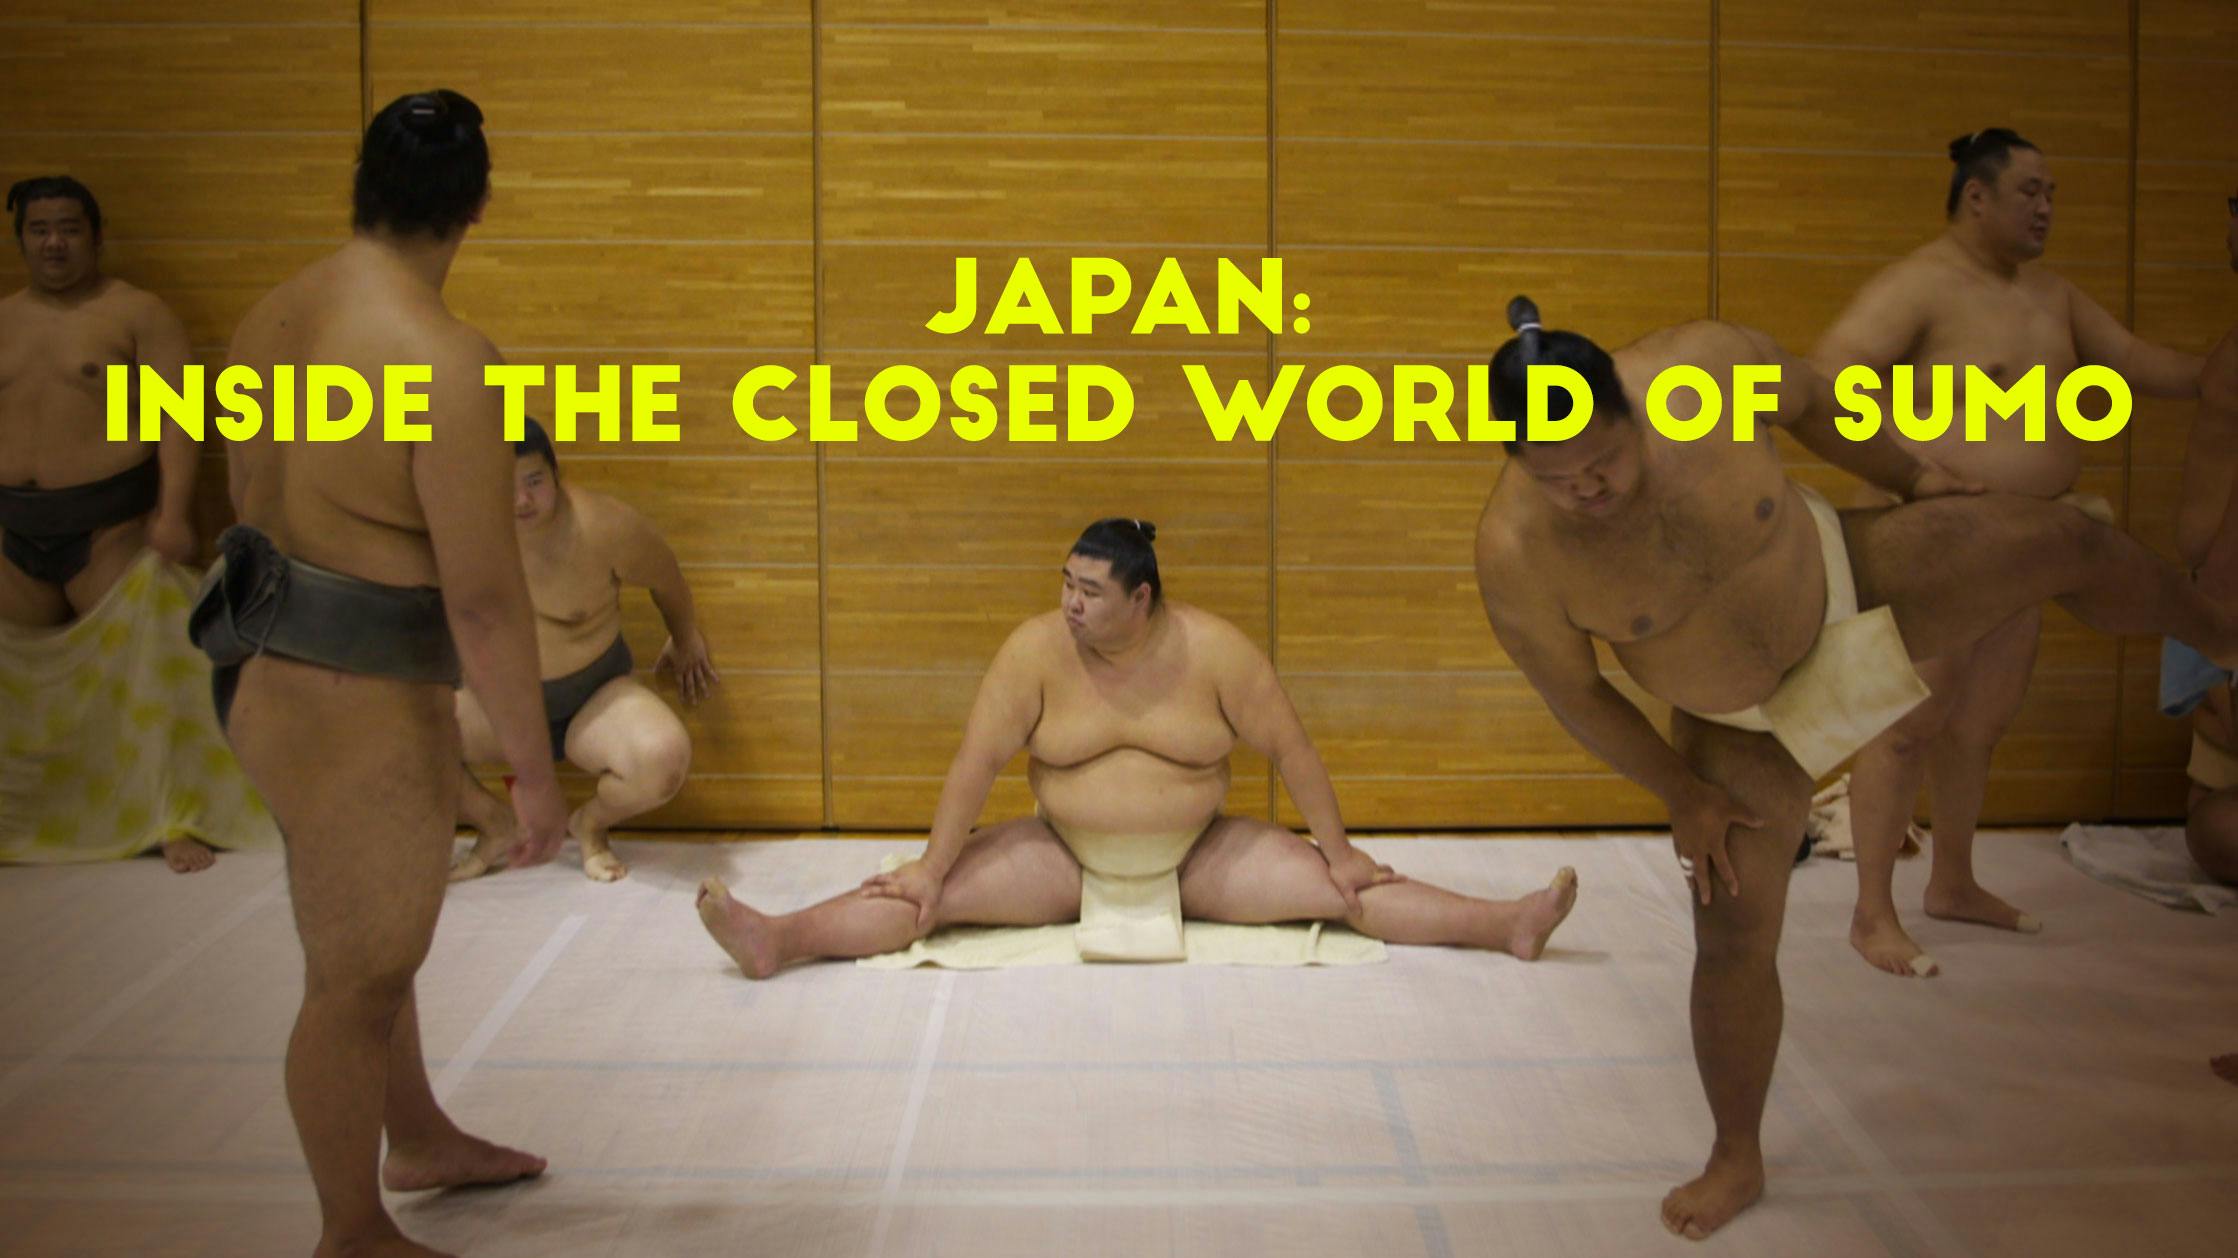 Japan: Inside The Closed World of Sumo